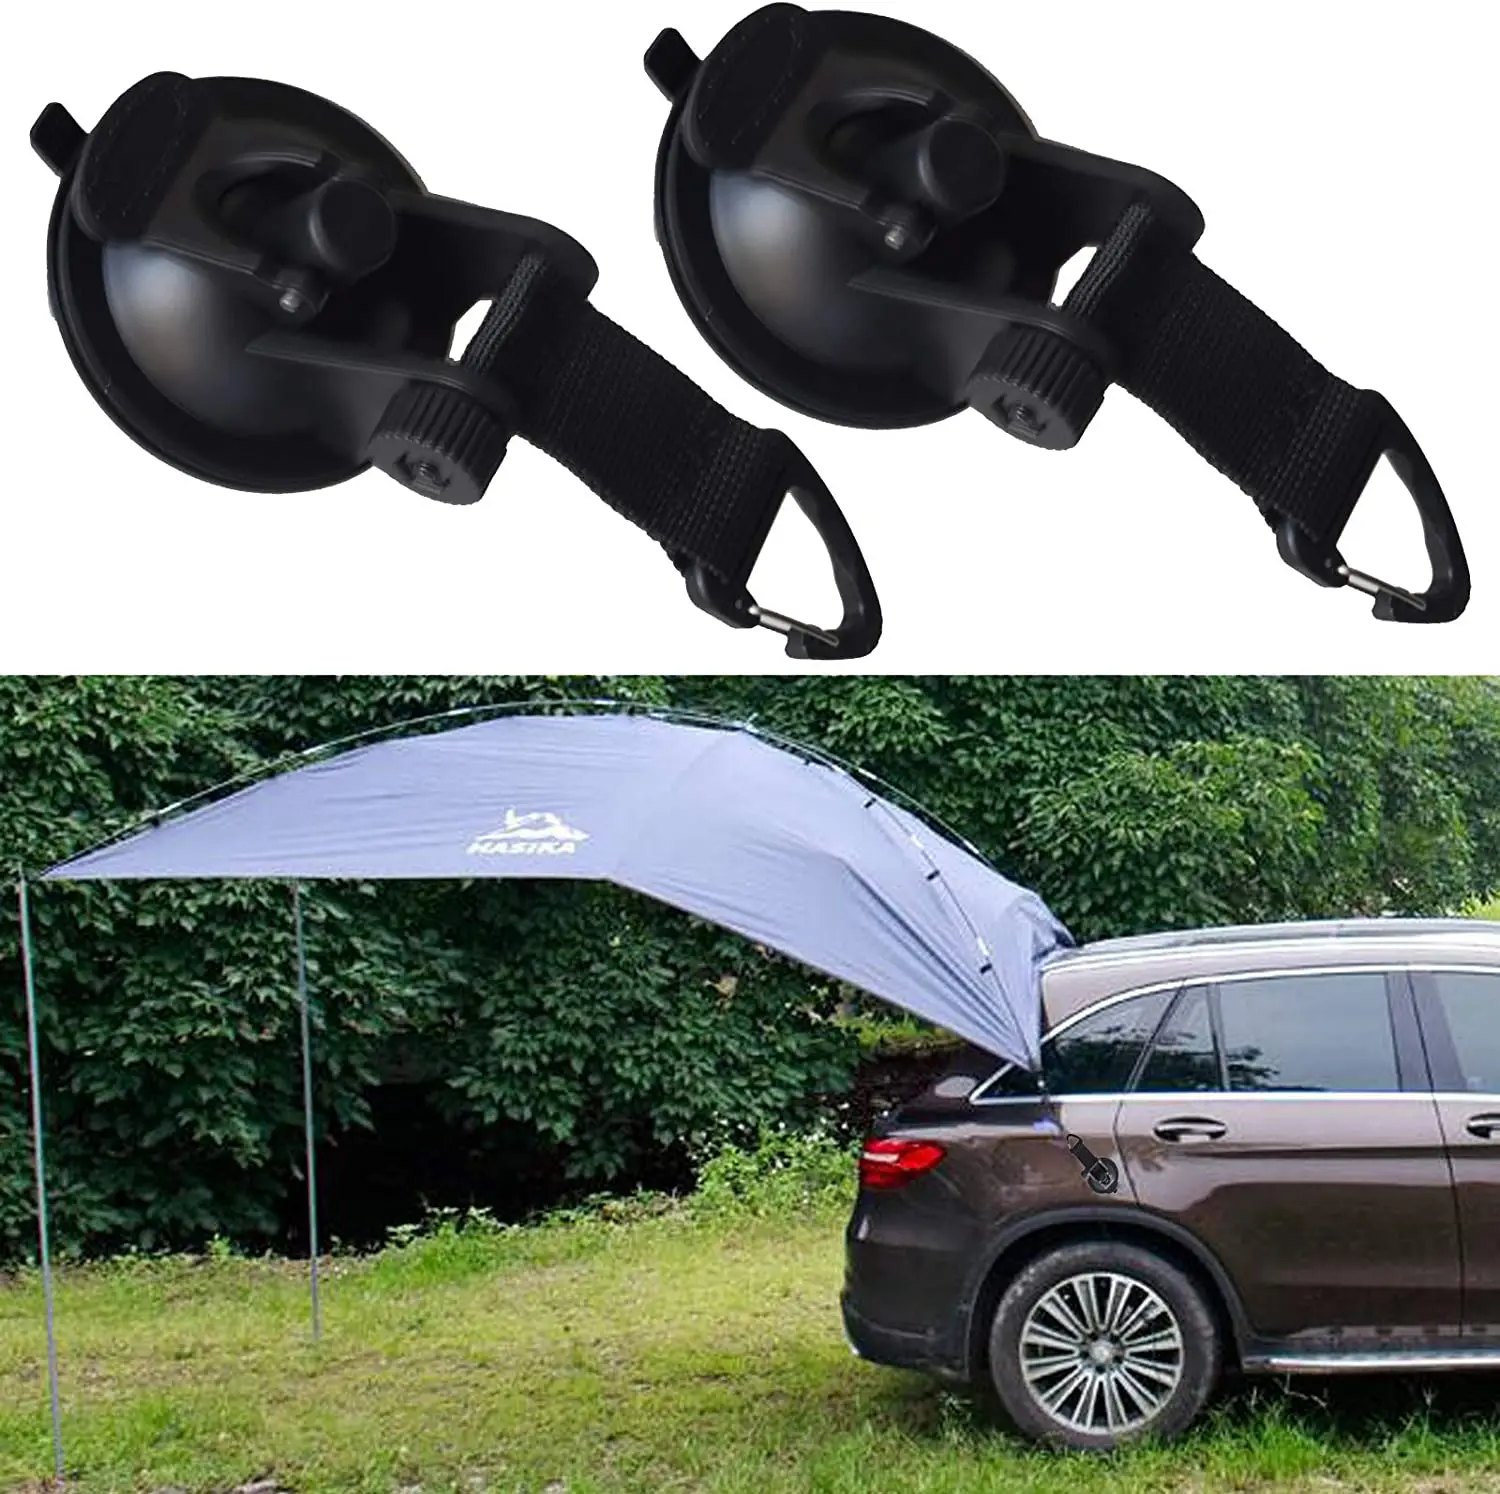 2 Pieces Heavy Duty Suction Cup Anchor with Securing Hook Tie Down Camping Tarp 